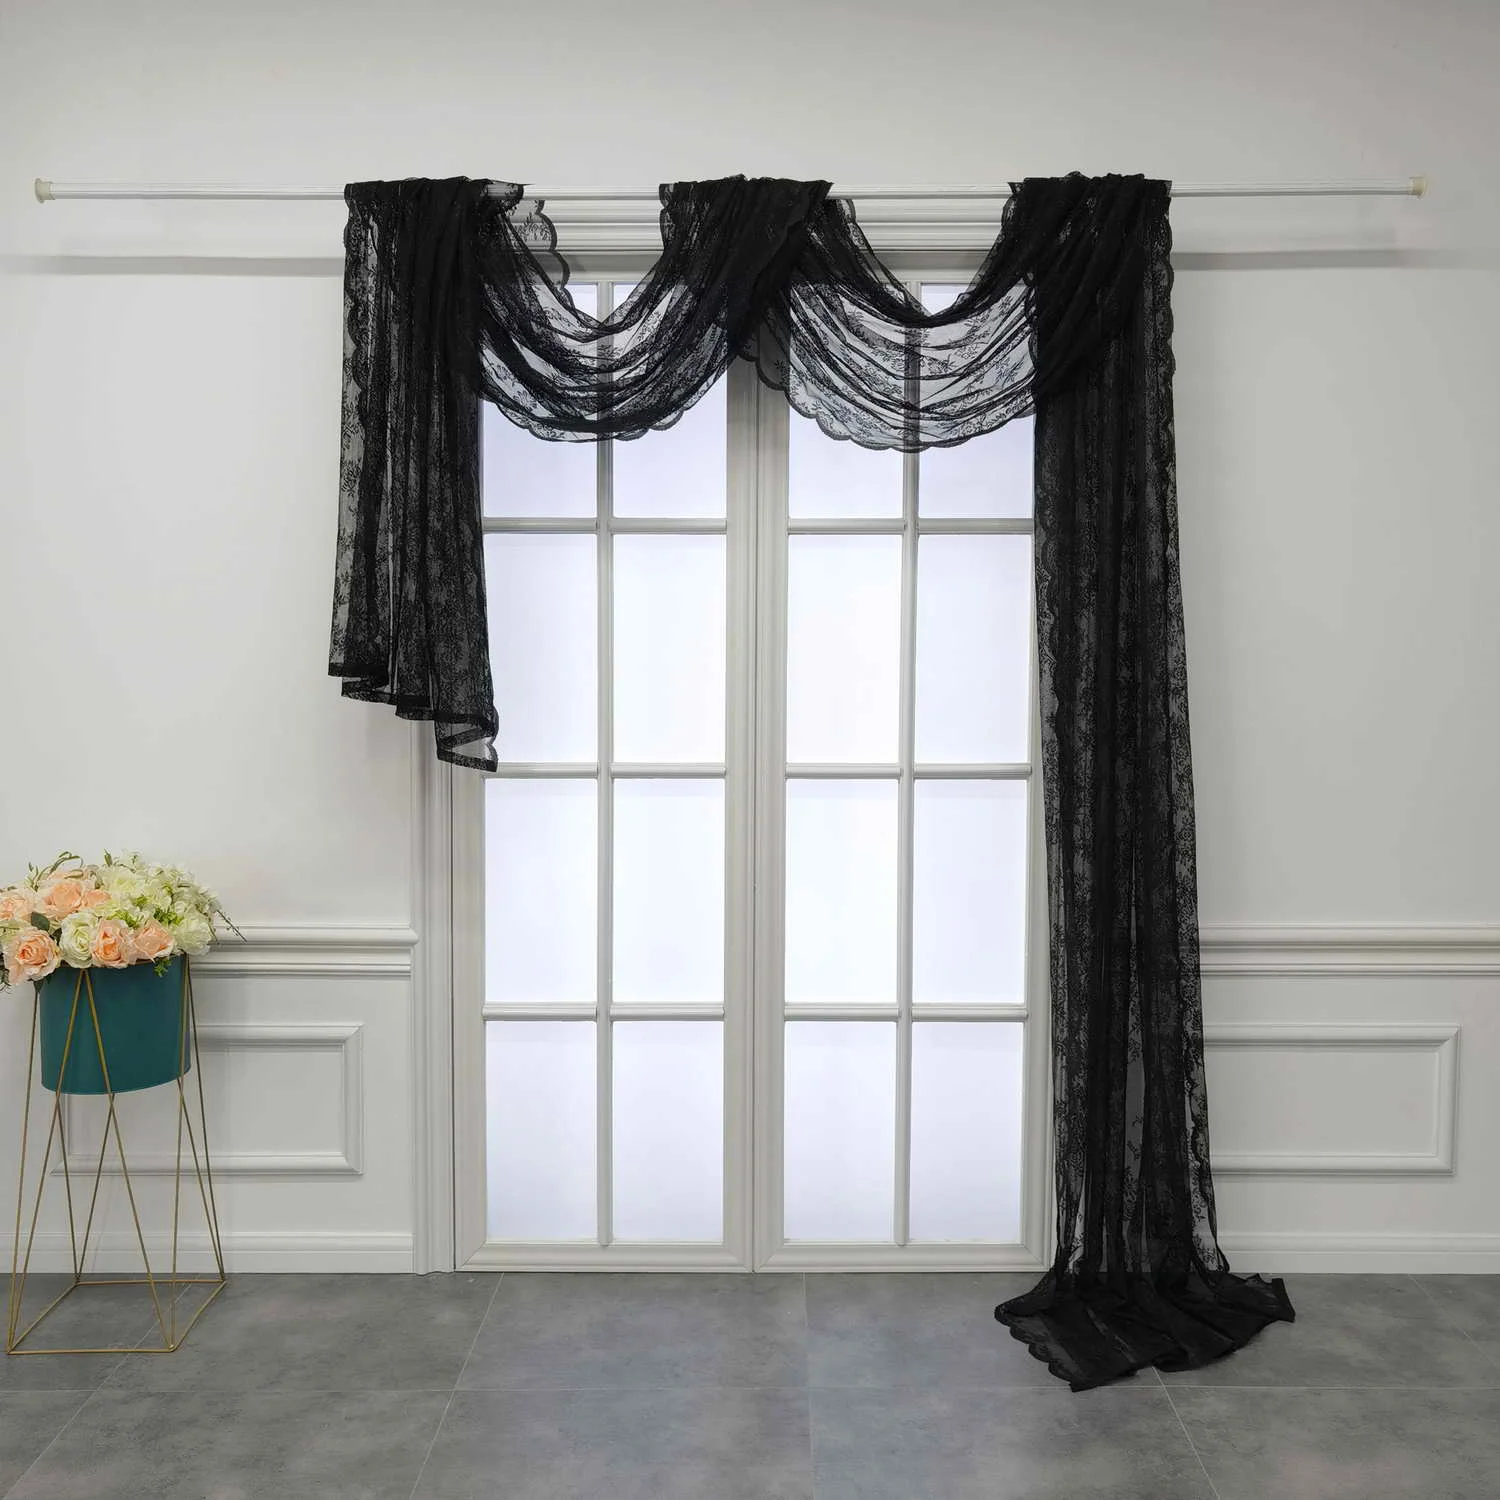 Black Luxury Floral Embroidery Elegant Jacquard Sheer Scarf Valance Extra Long Voile Wedding Arch Bed Canopy Party Backdrop